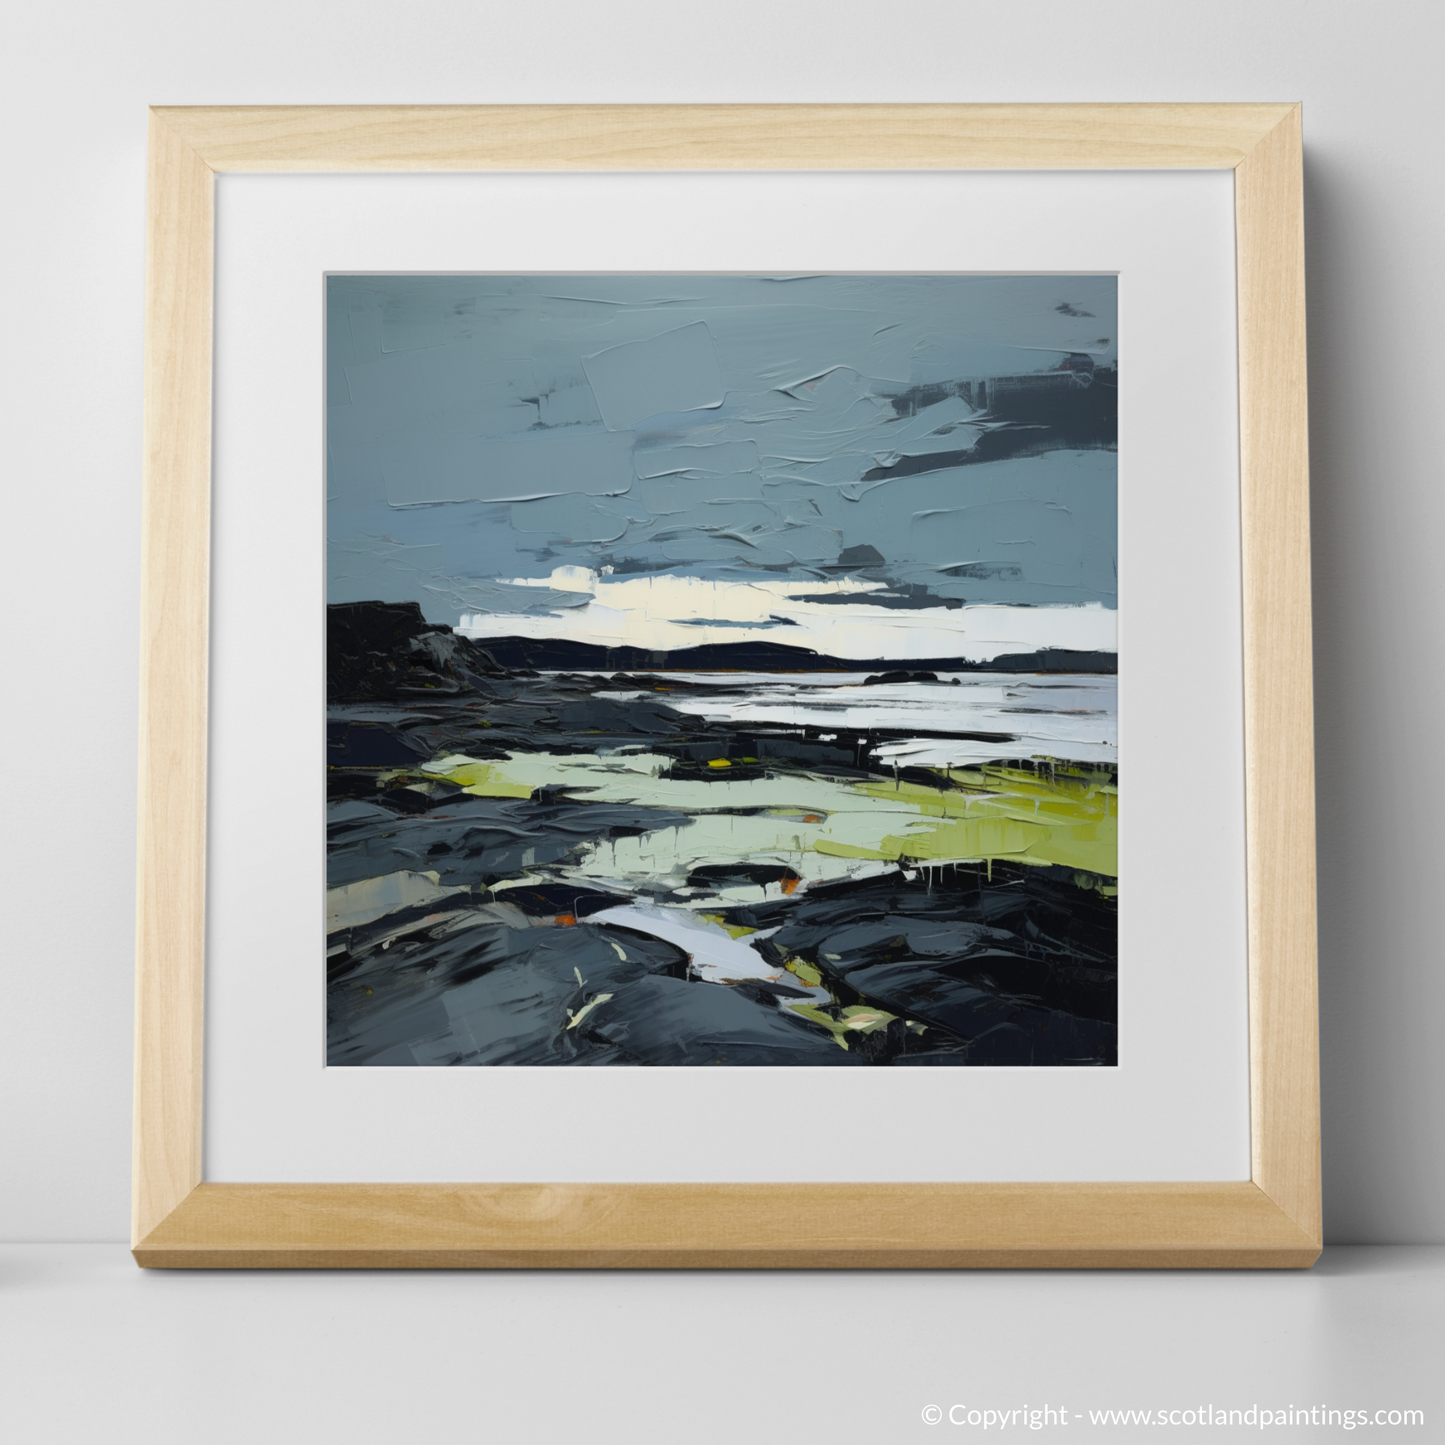 Art Print of Largo Bay, Fife with a natural frame